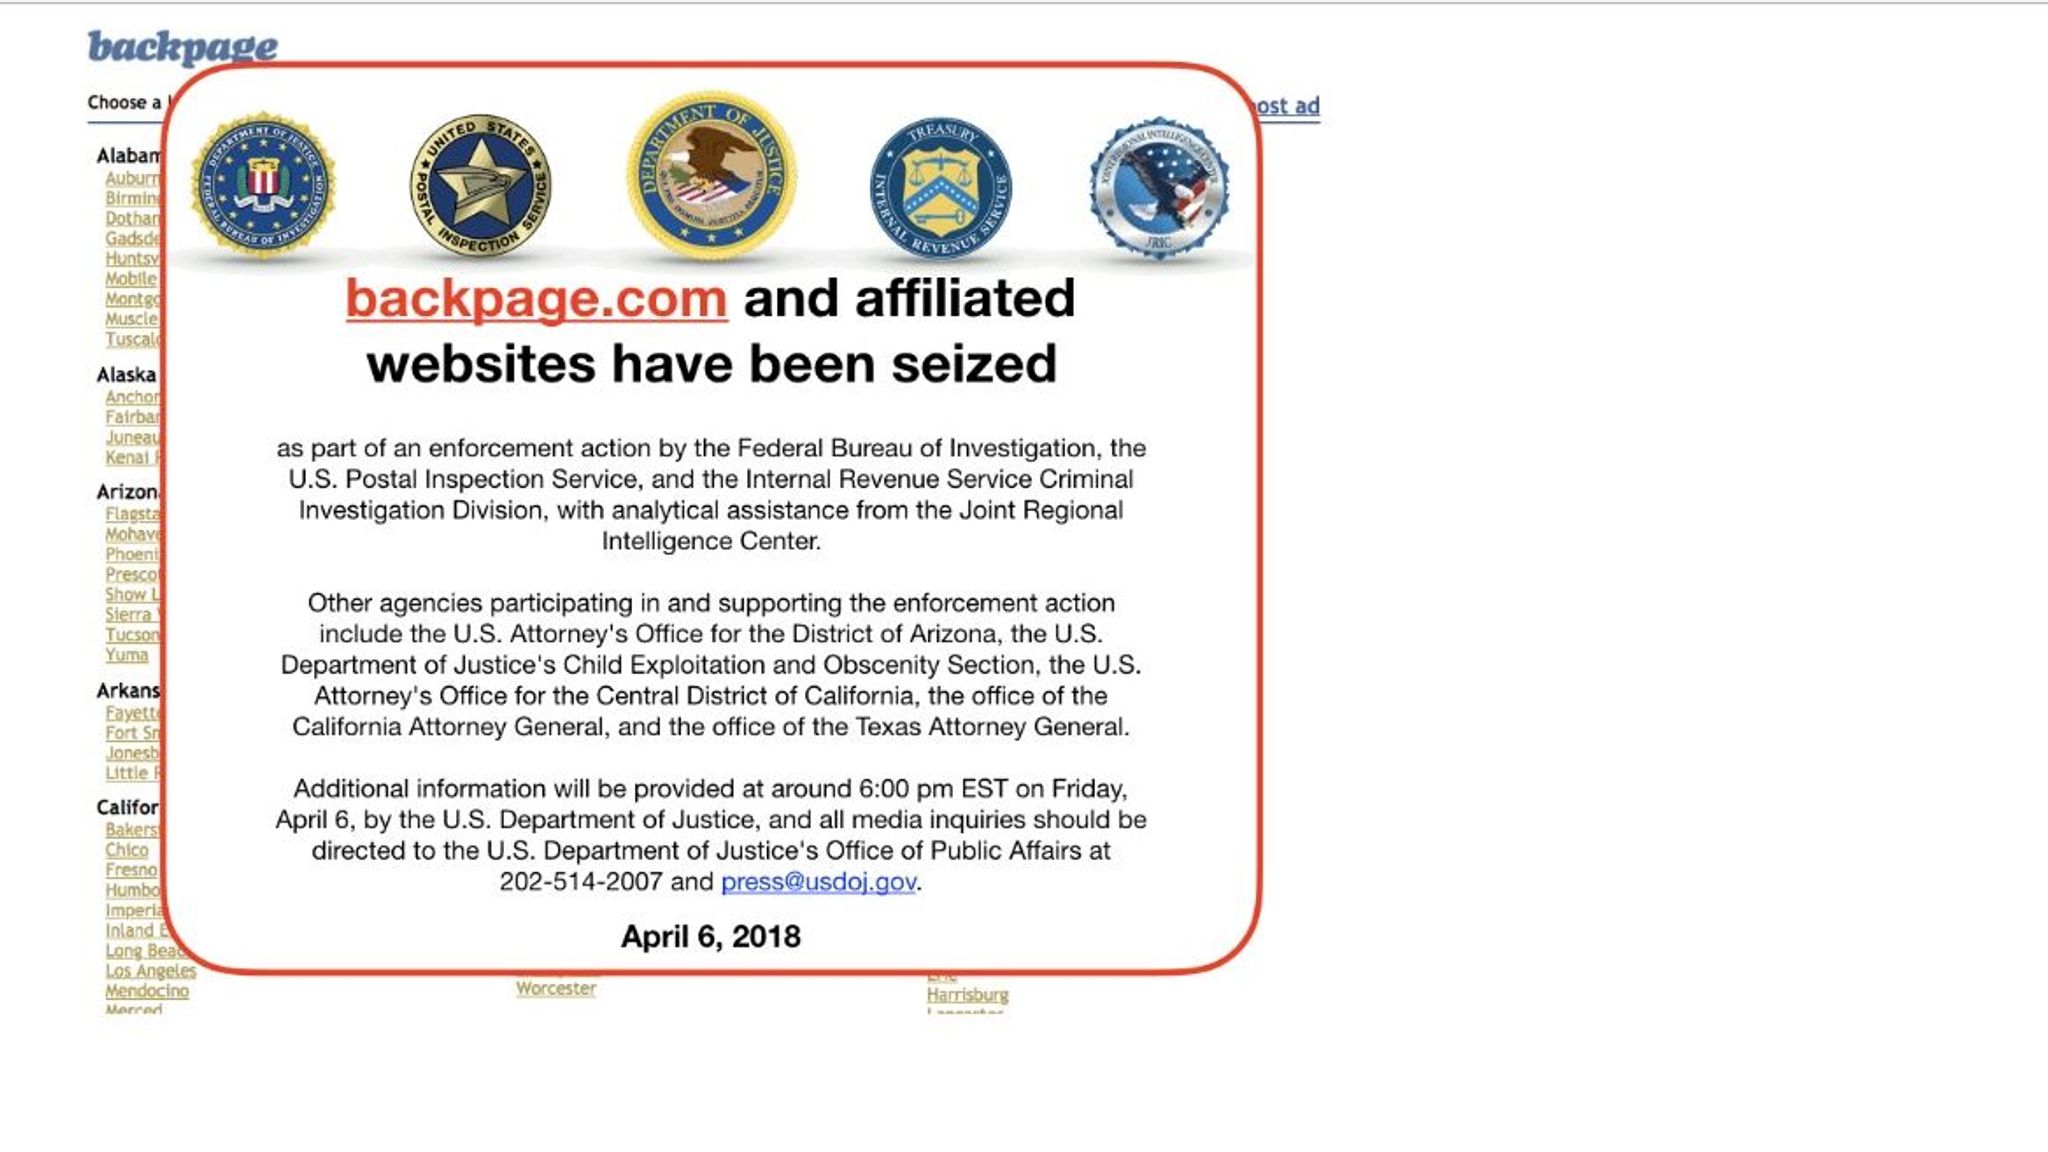 The Backpage.com website was taken down and seized.